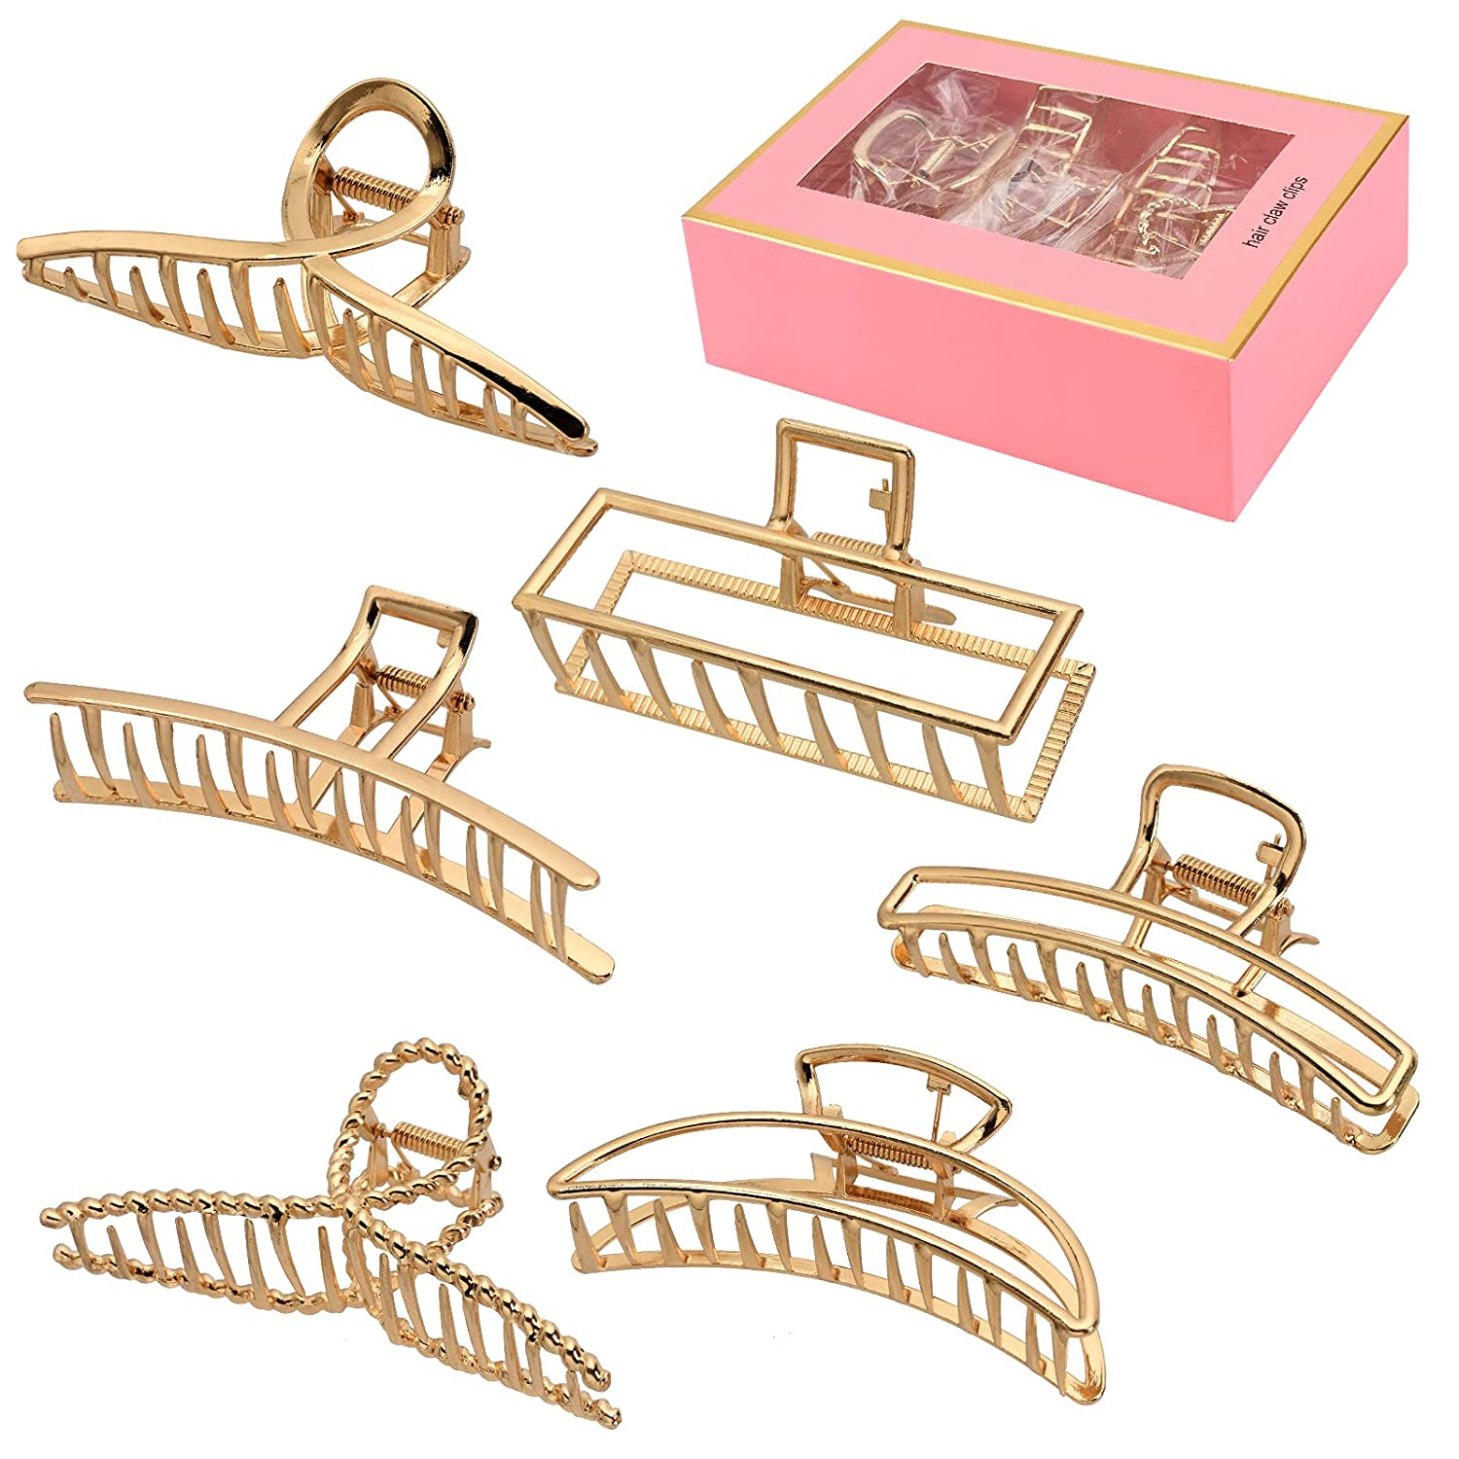 6 pack of large metal hair clips with pink box on the side